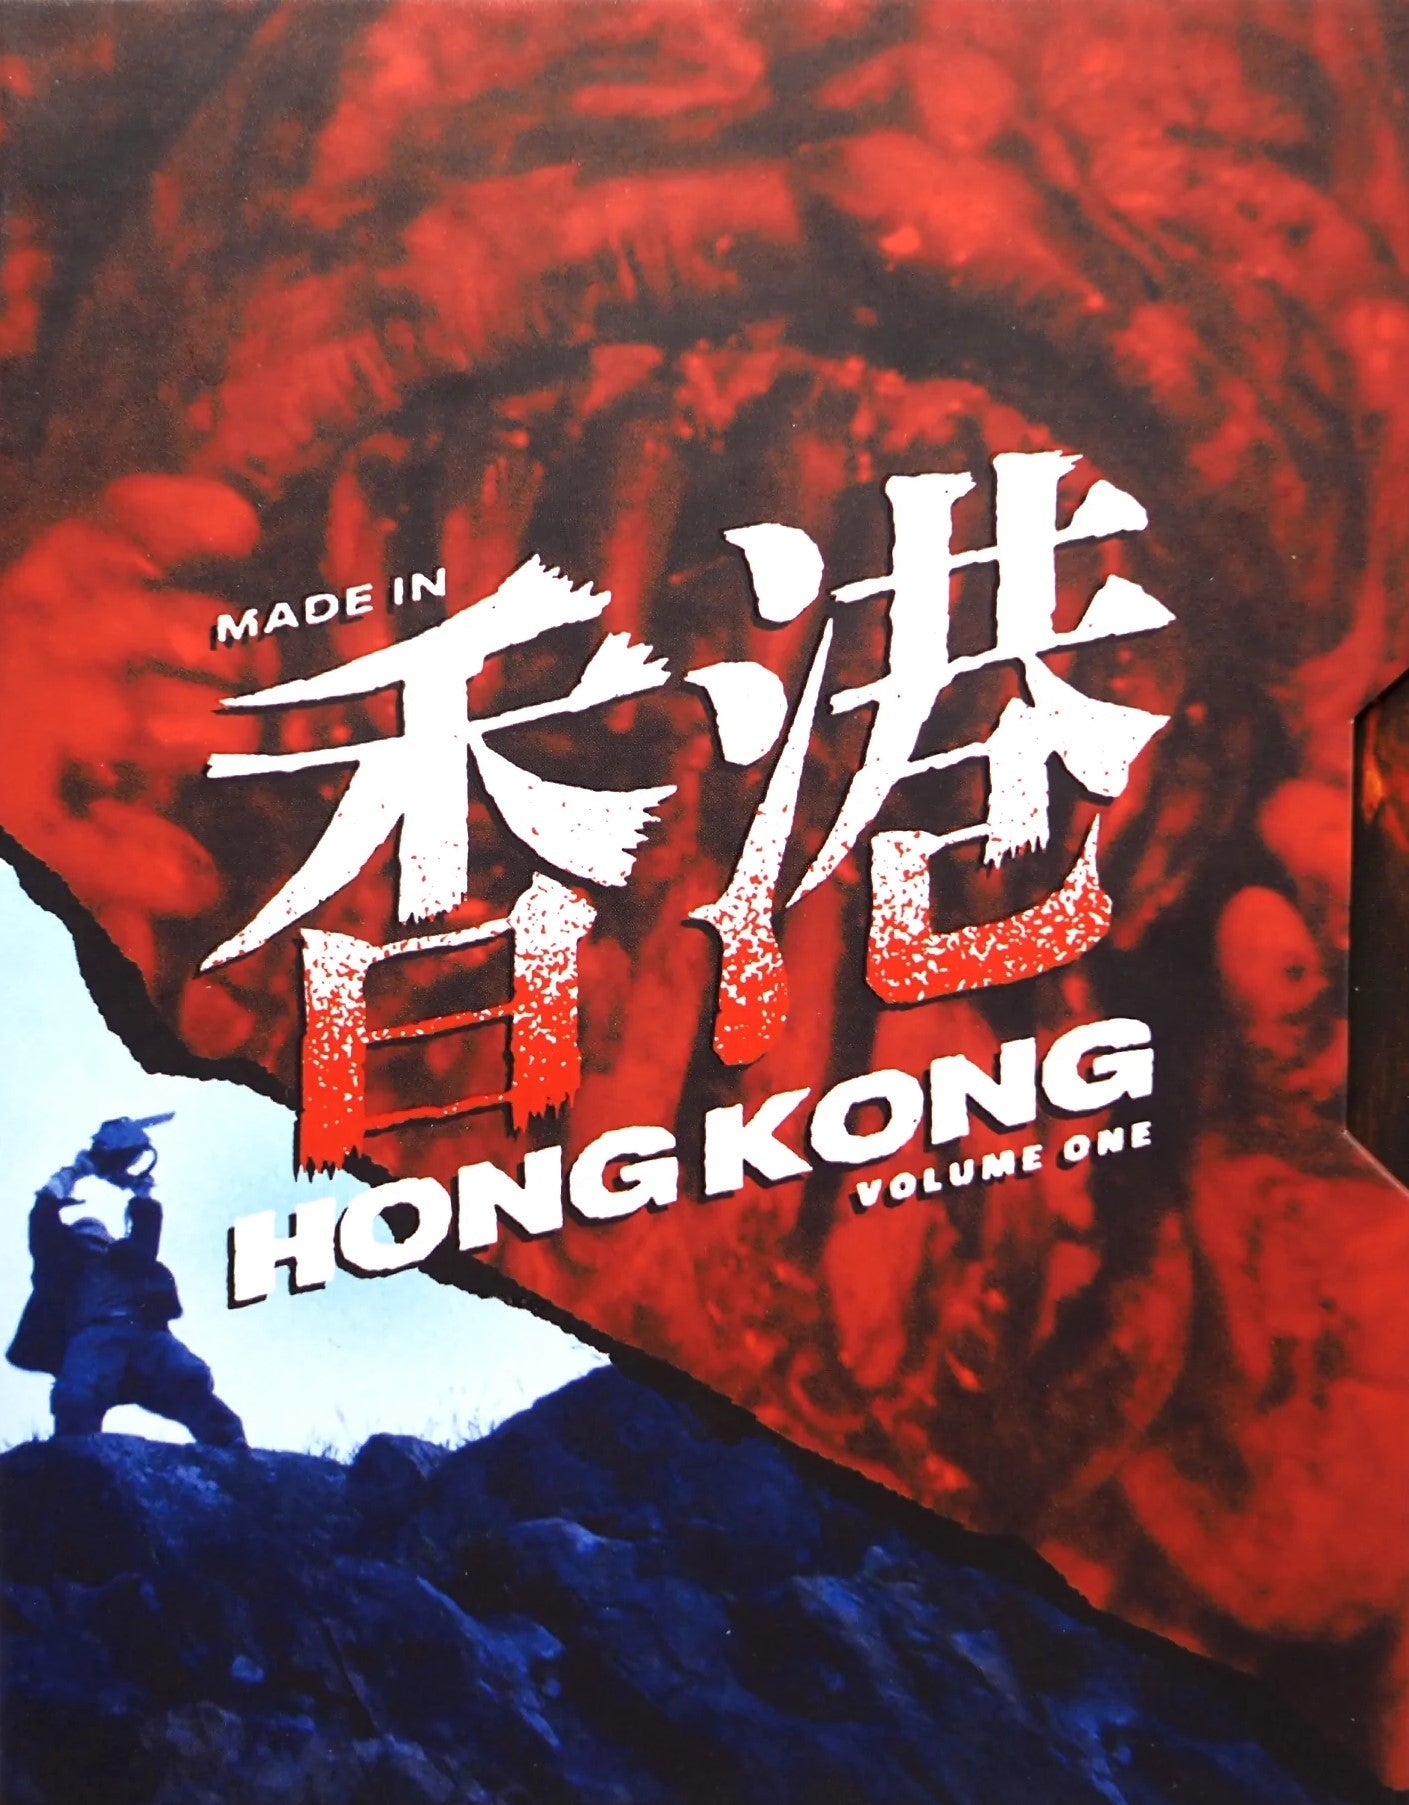 MADE IN HONG KONG VOLUME 1 (LIMITED EDITION) BLU-RAY